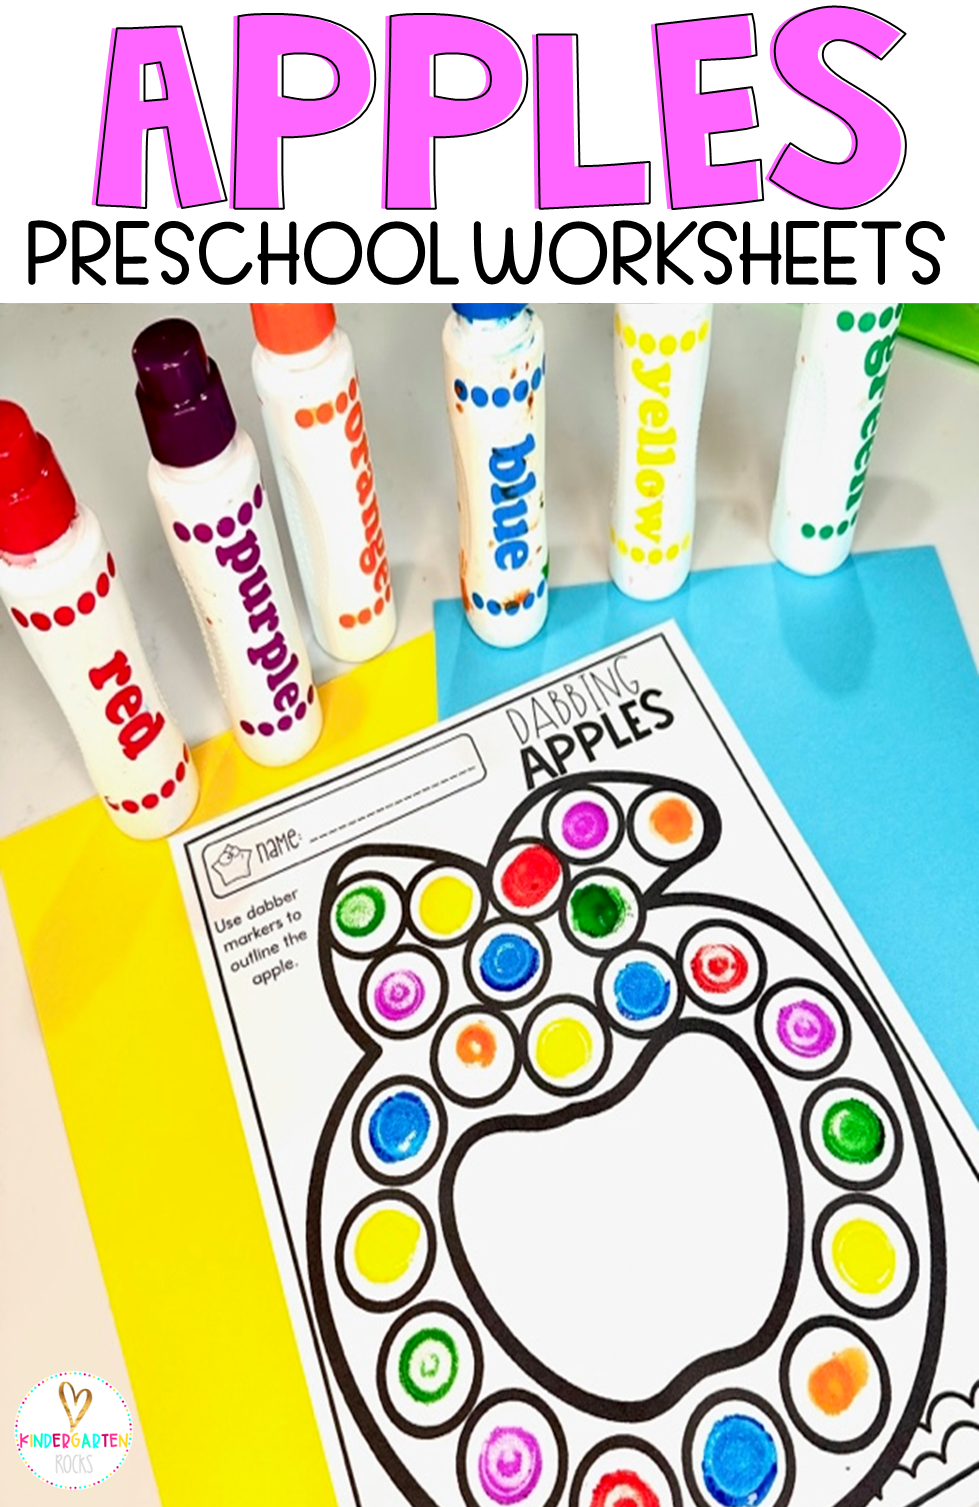 Are you looking for no-prep apple themed activities, printable and math and literacy worksheets for your preschool or kindergarten classroom? The you will love our Apple Printables and Worksheets for Preschool.